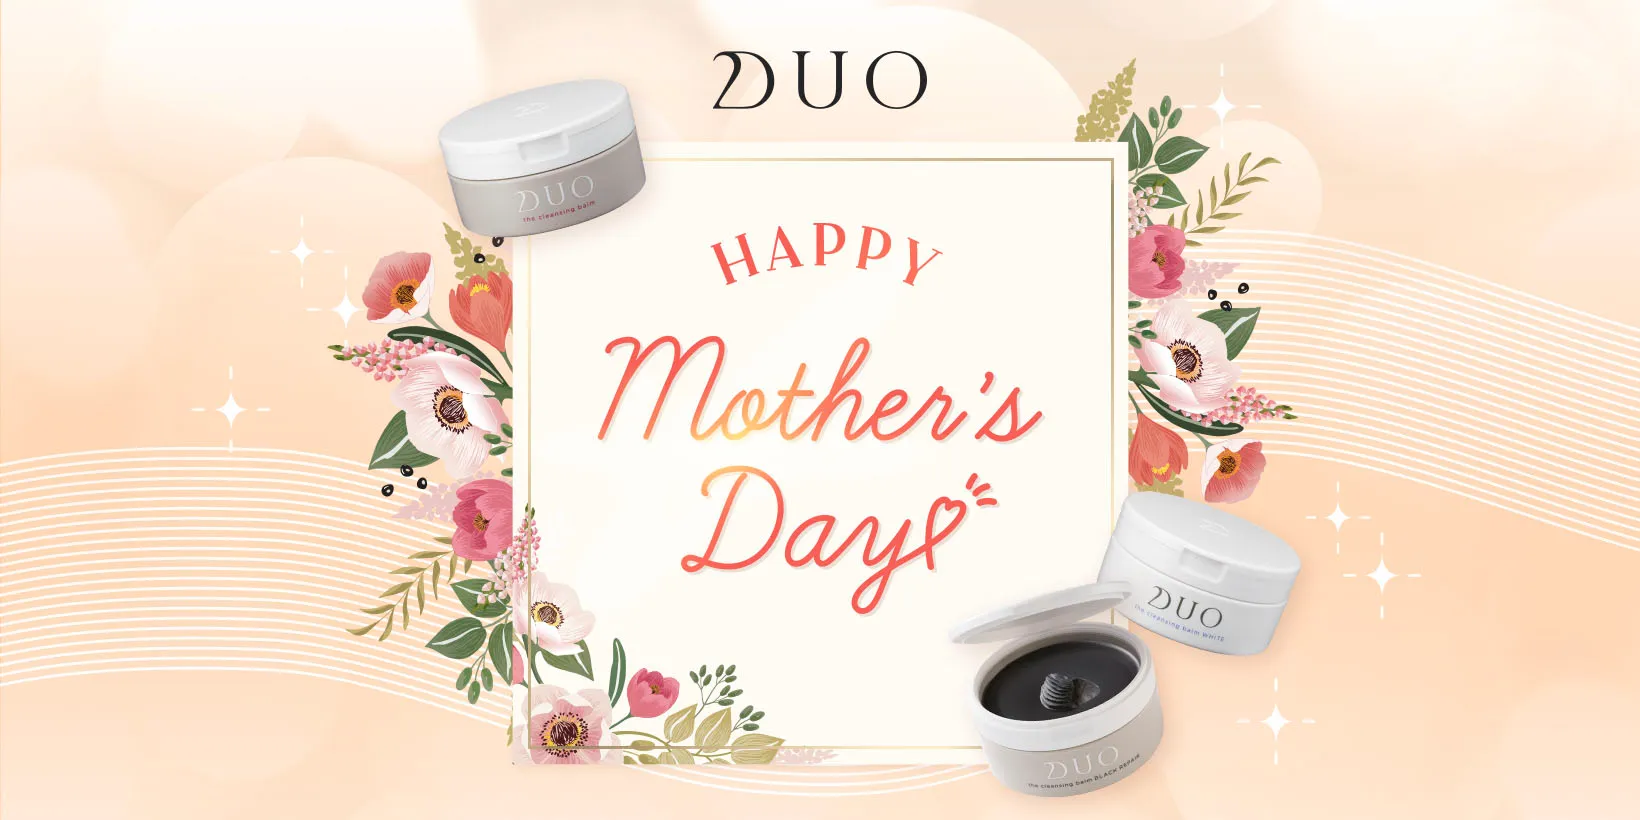 DUO HAPPY mother’s Days